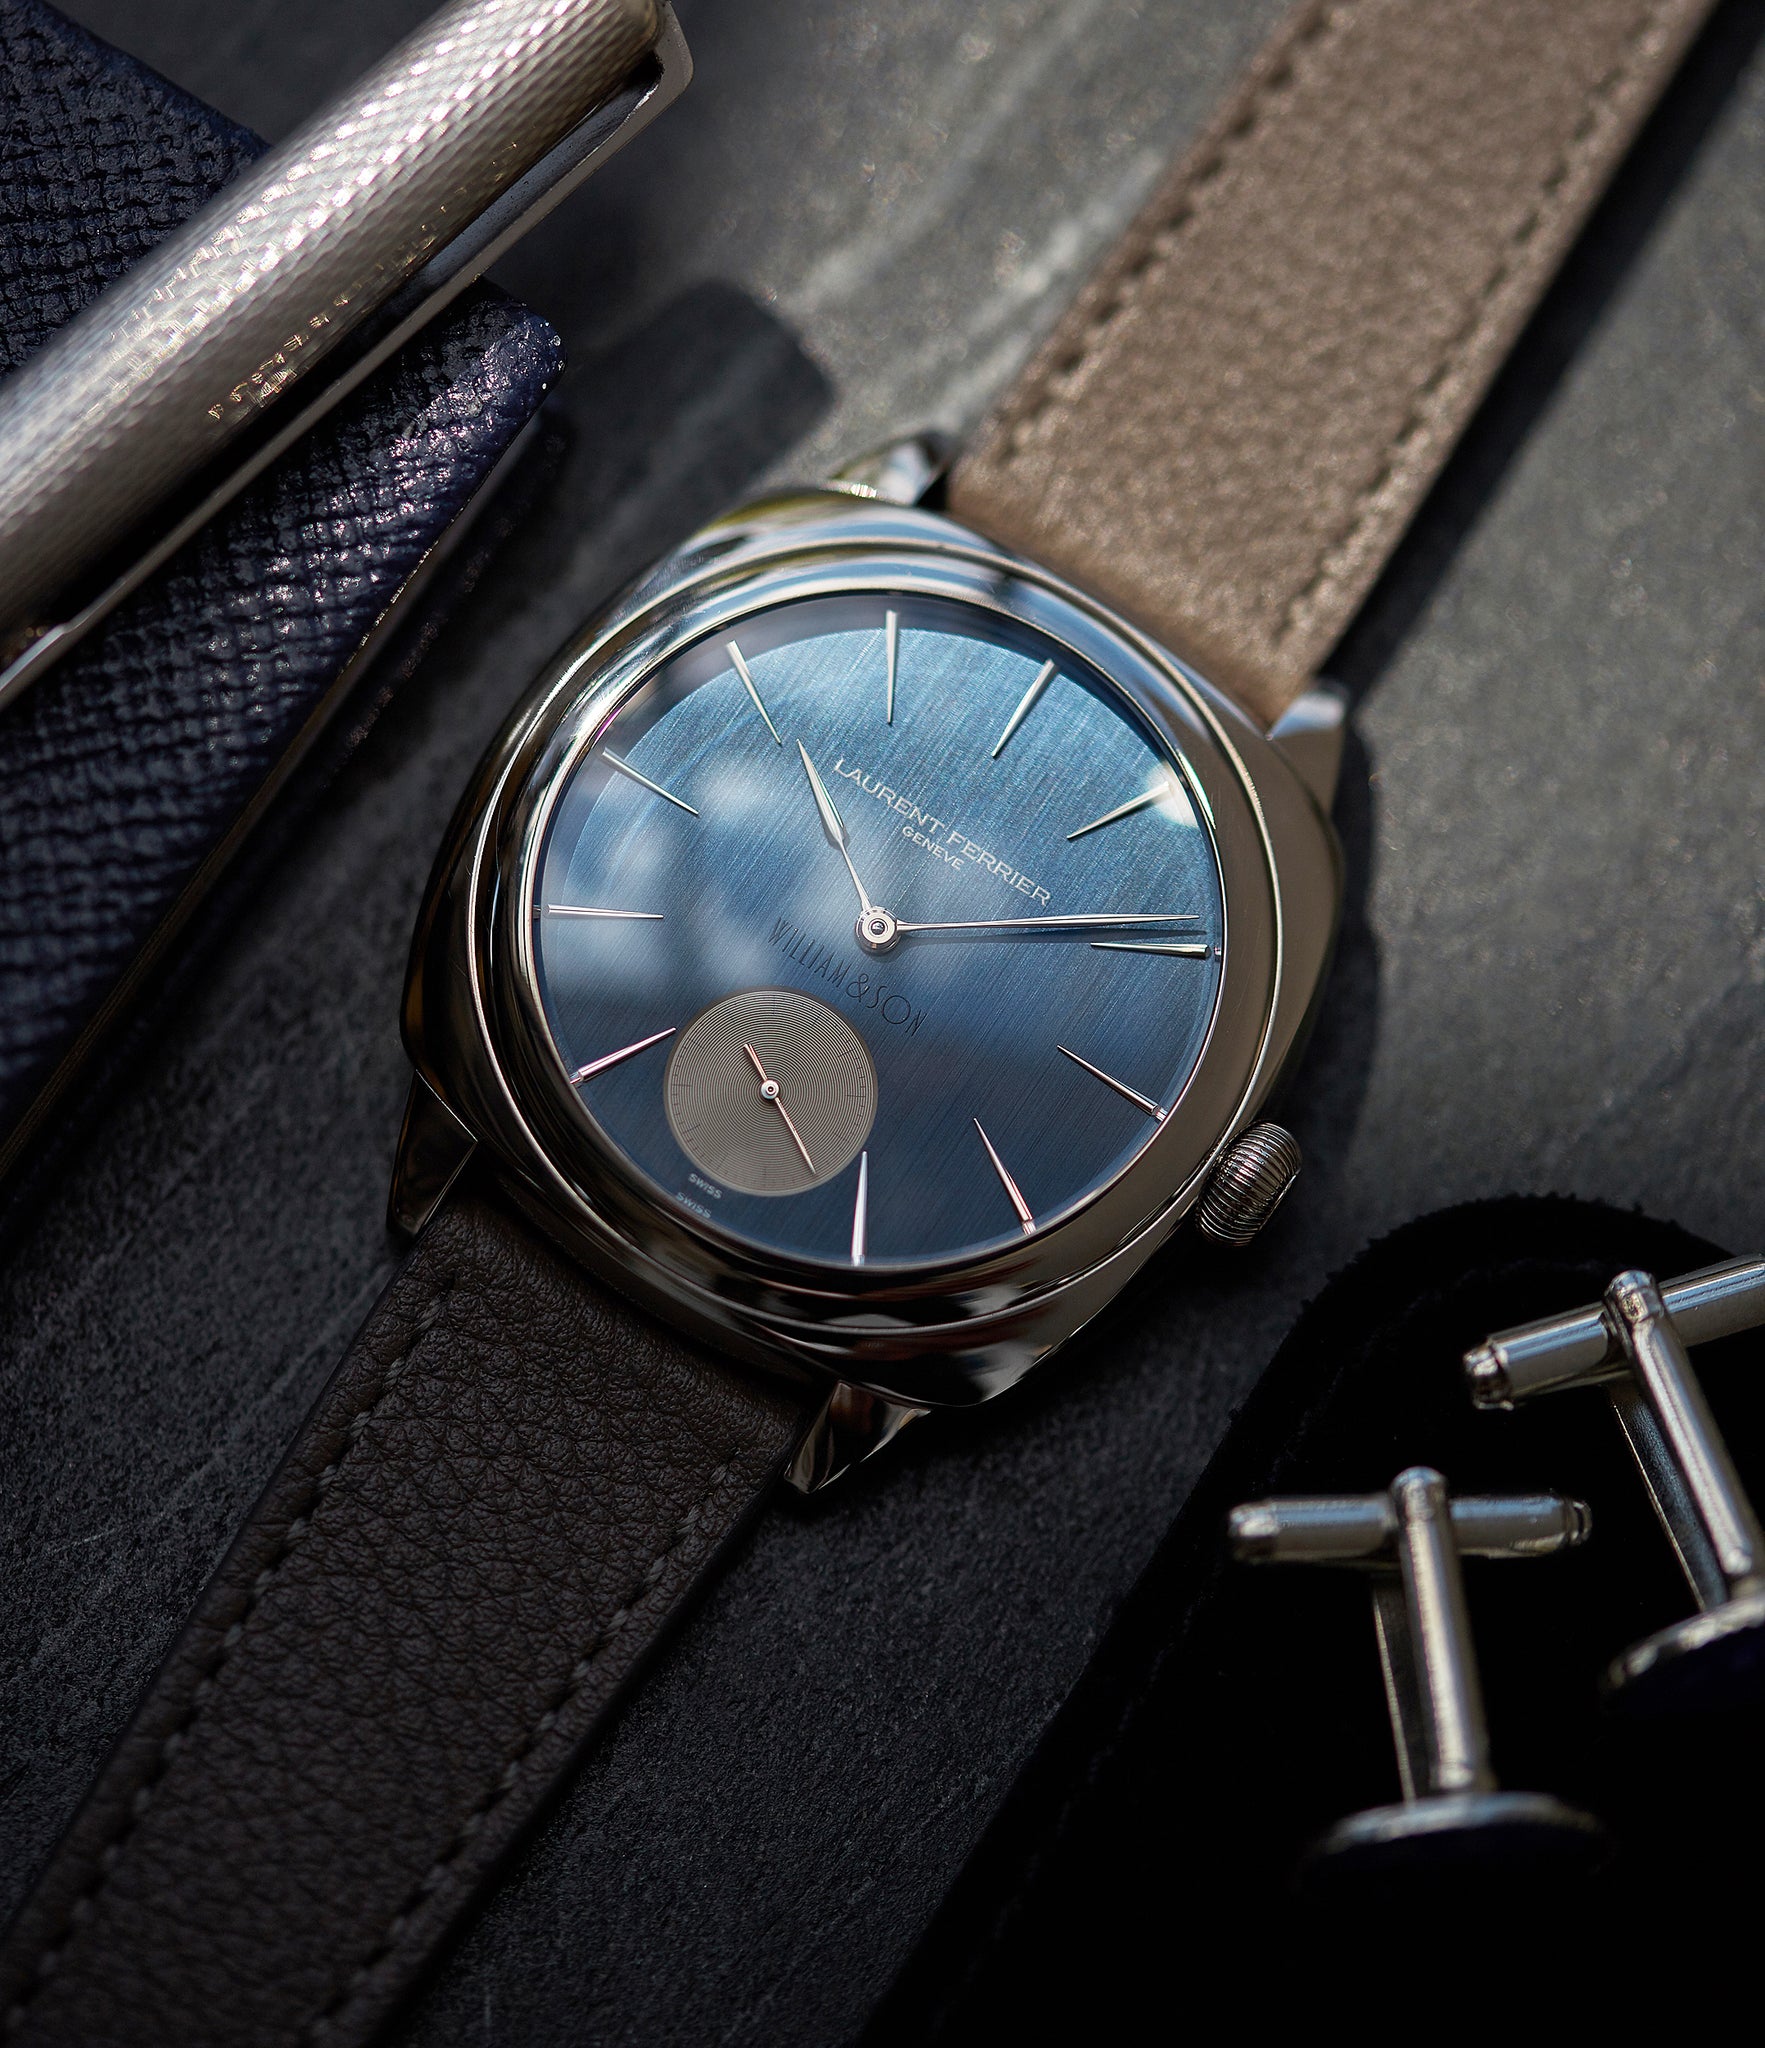 luxury dress watch Laurent Ferrier Micro Rotor LF 229.01 Galet Square William&Son blue dial white gold watch online at A Collected Man London approved seller of preowned independent watchmakers